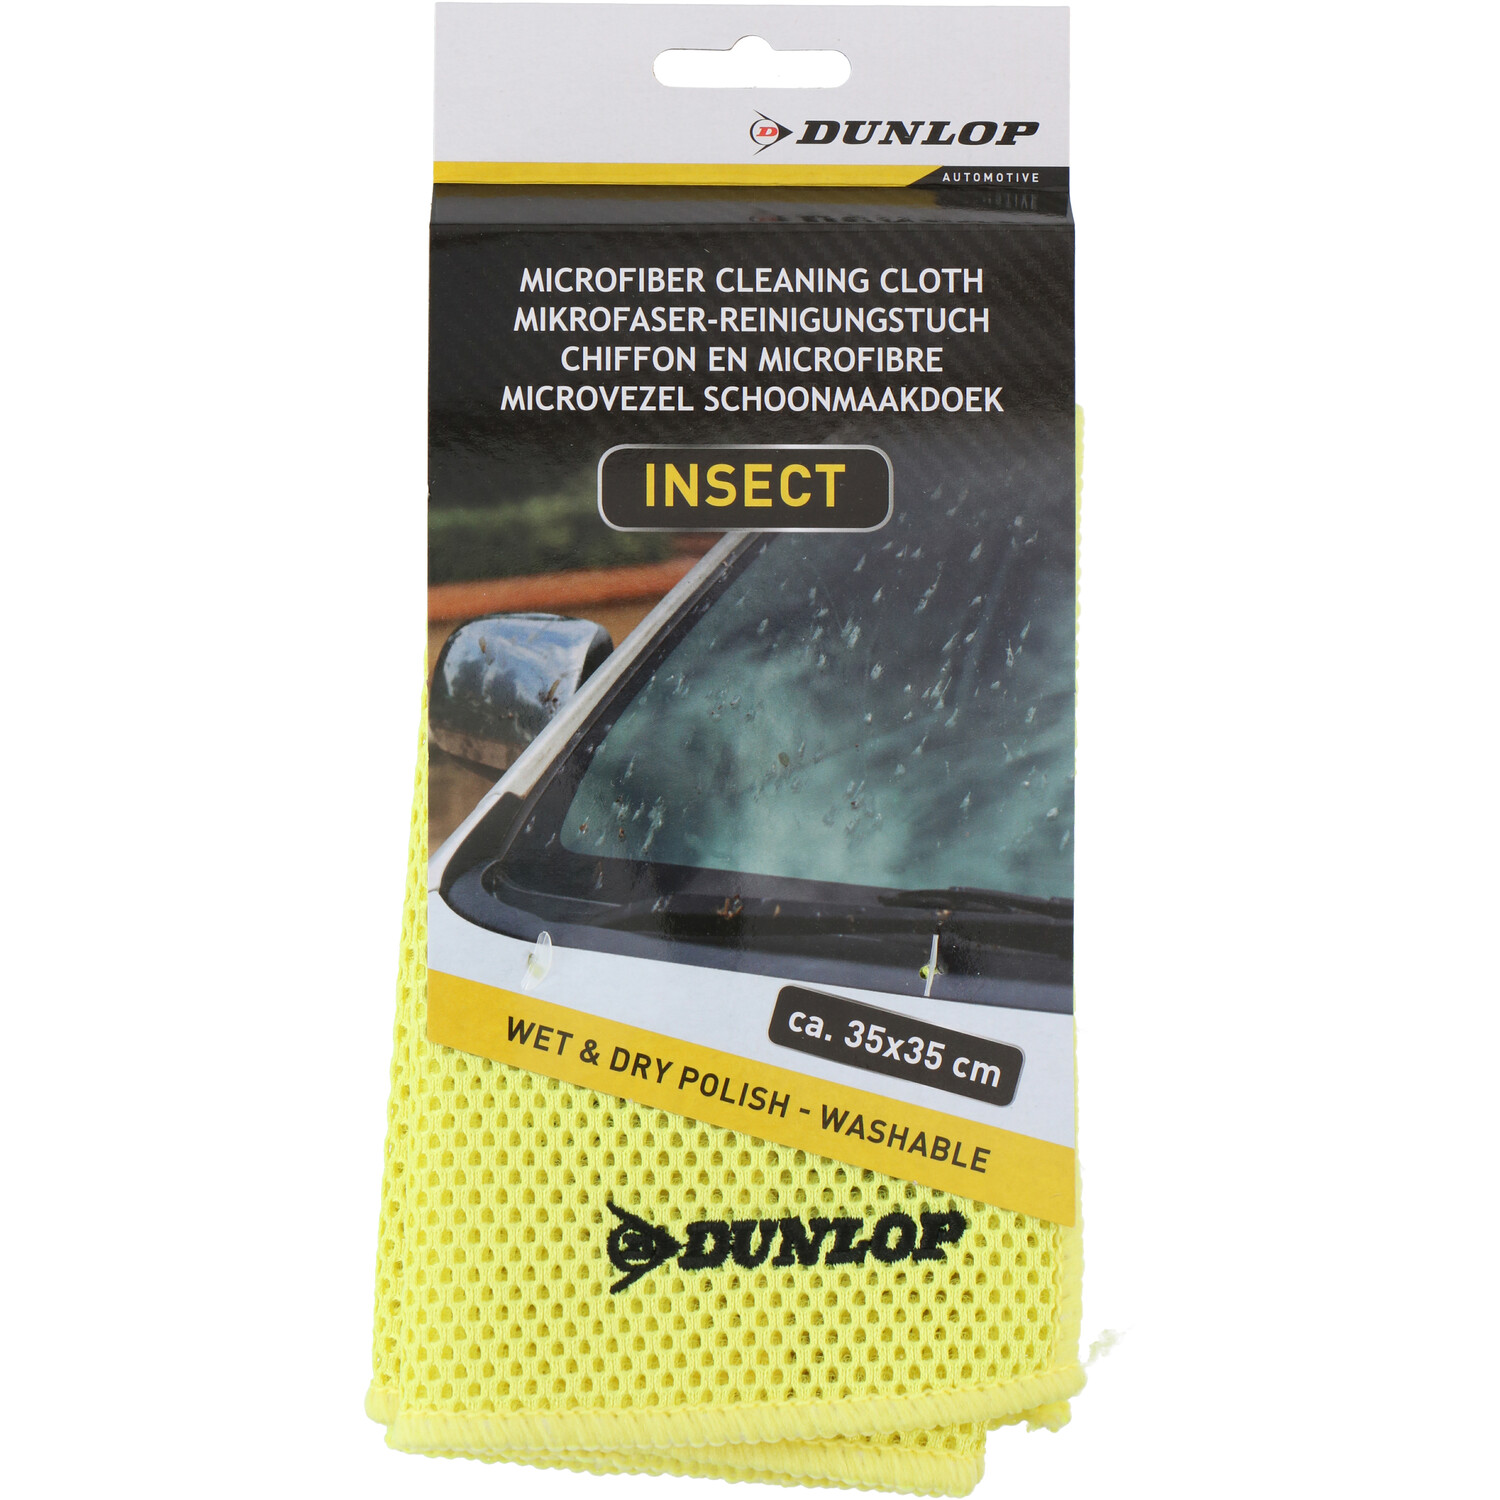 Dunlop Microfibre Cloth - Insect Image 1